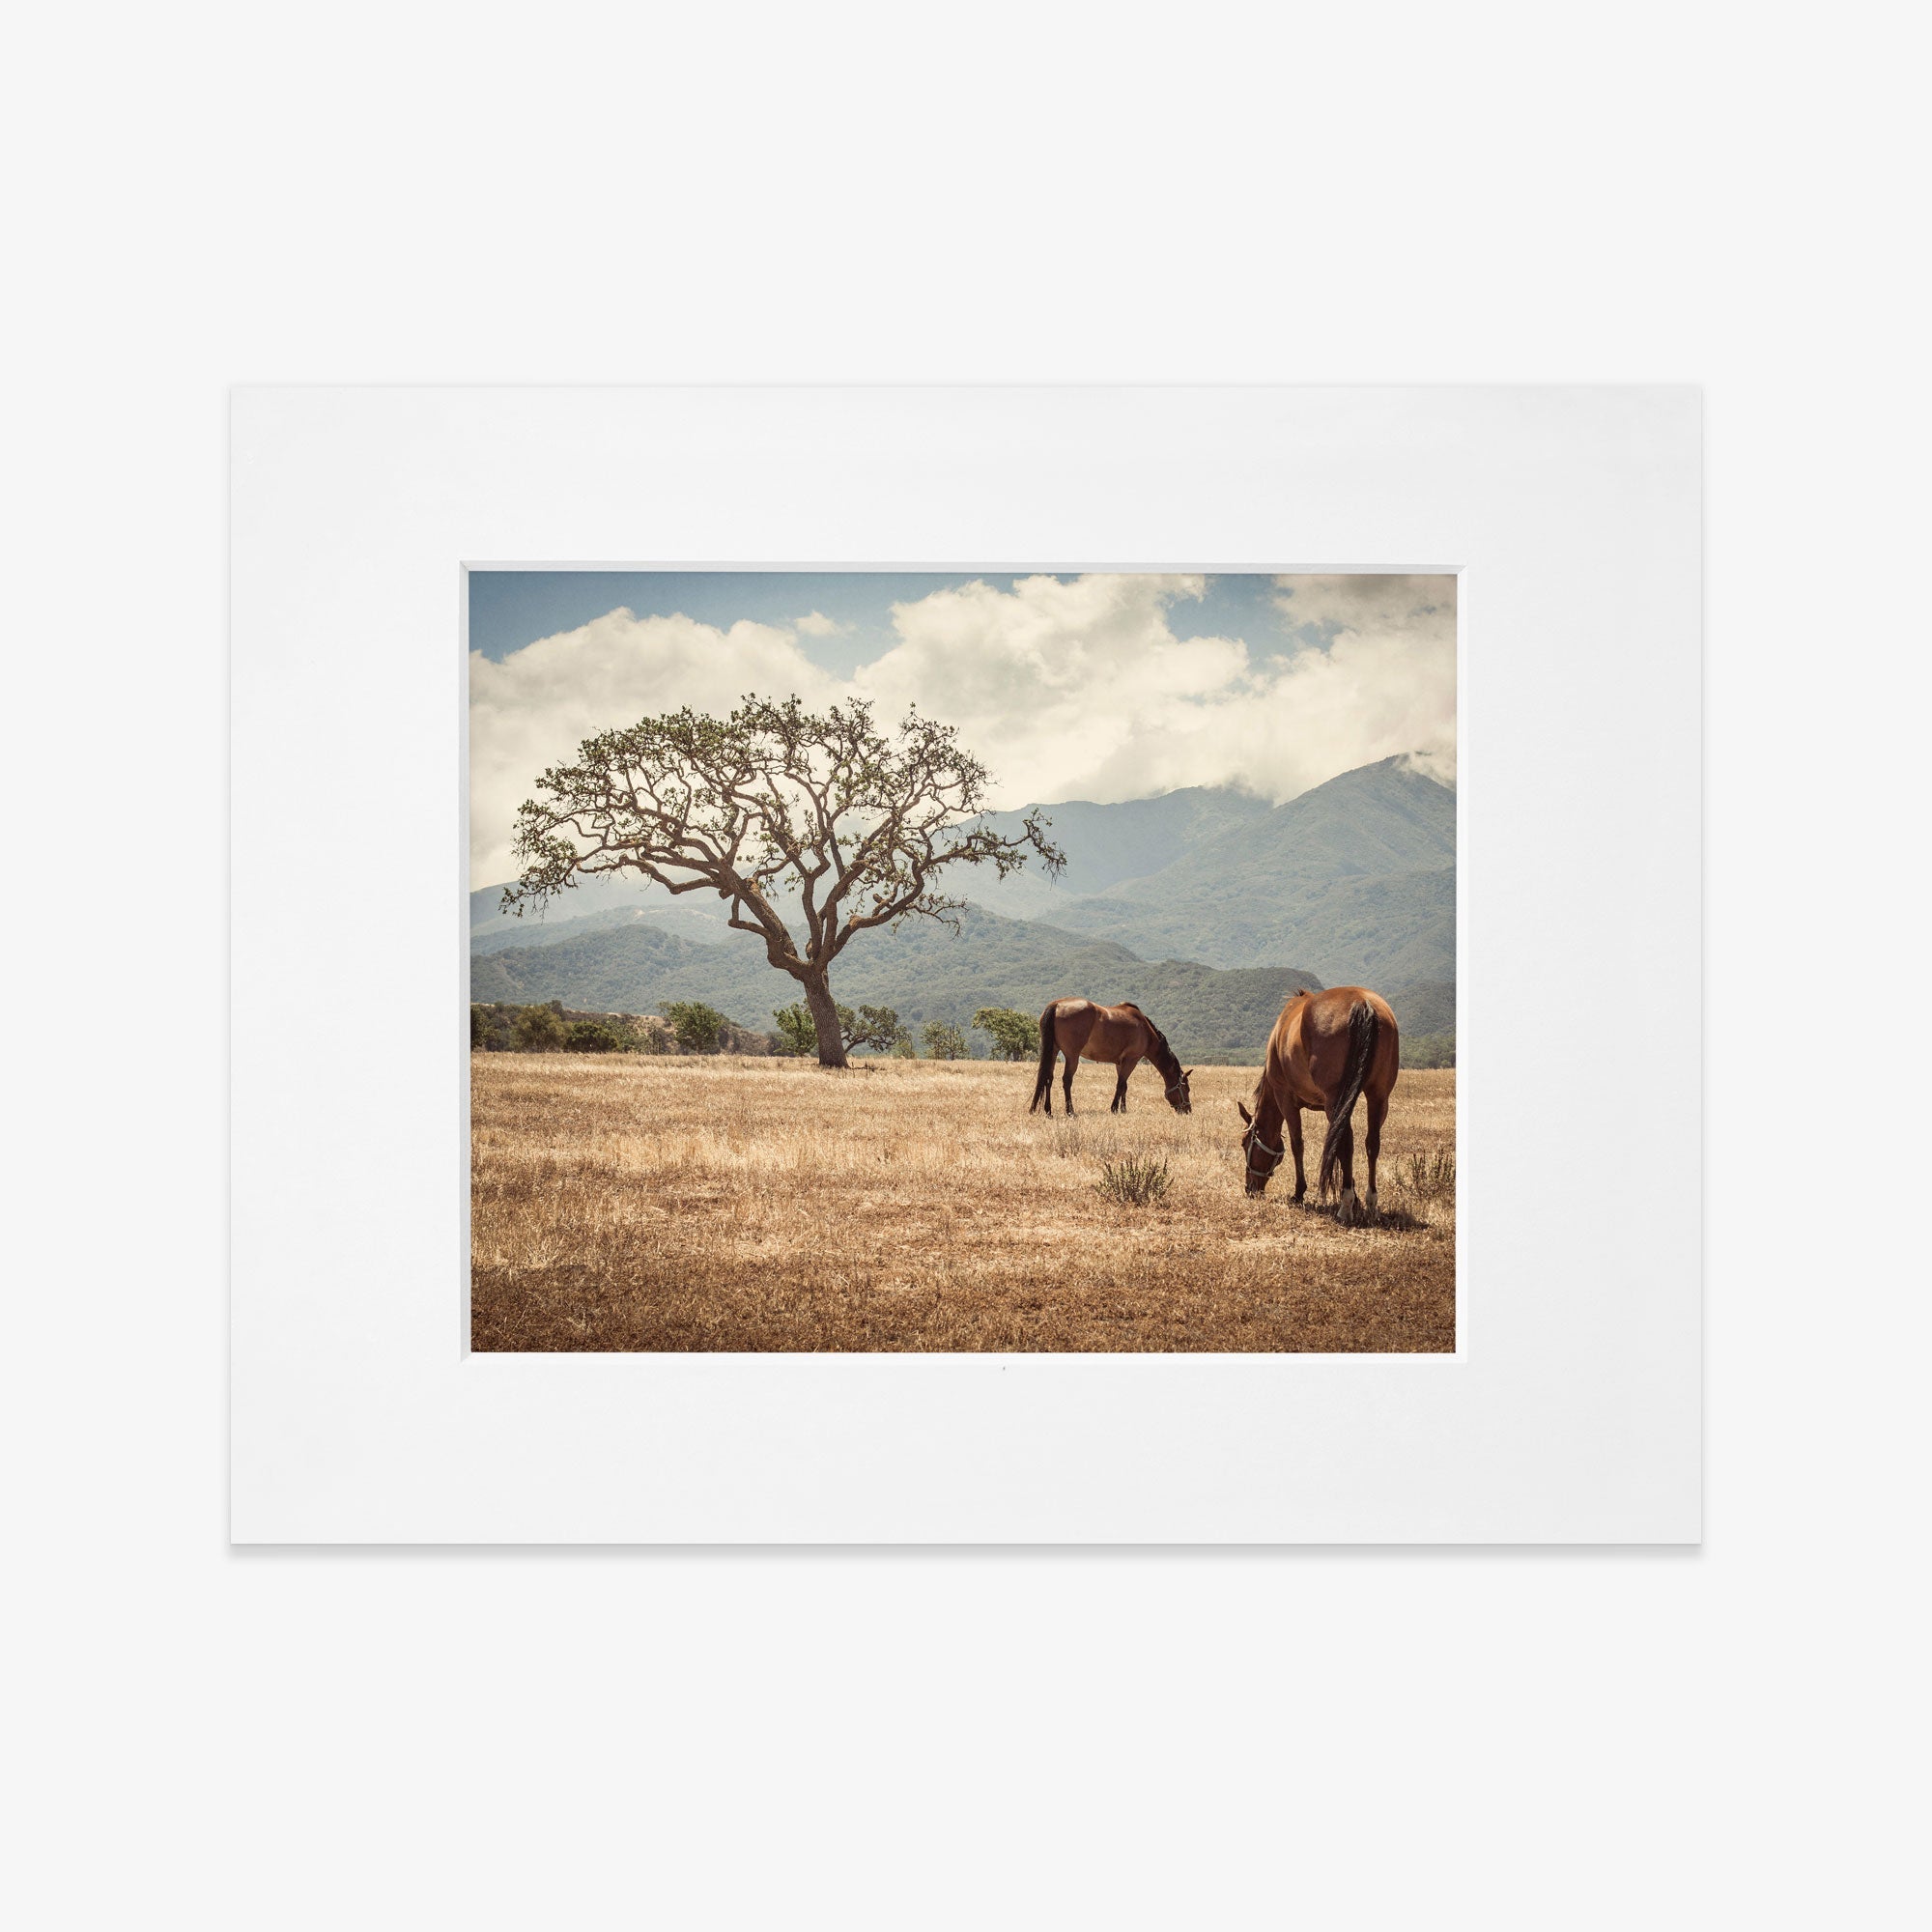 Two &#39;Santa Ynez Horses&#39; grazing under a large tree in Santa Ynez Valley on a dry grassy field with mountains and a cloudy sky in the background, framed photo on a white background.